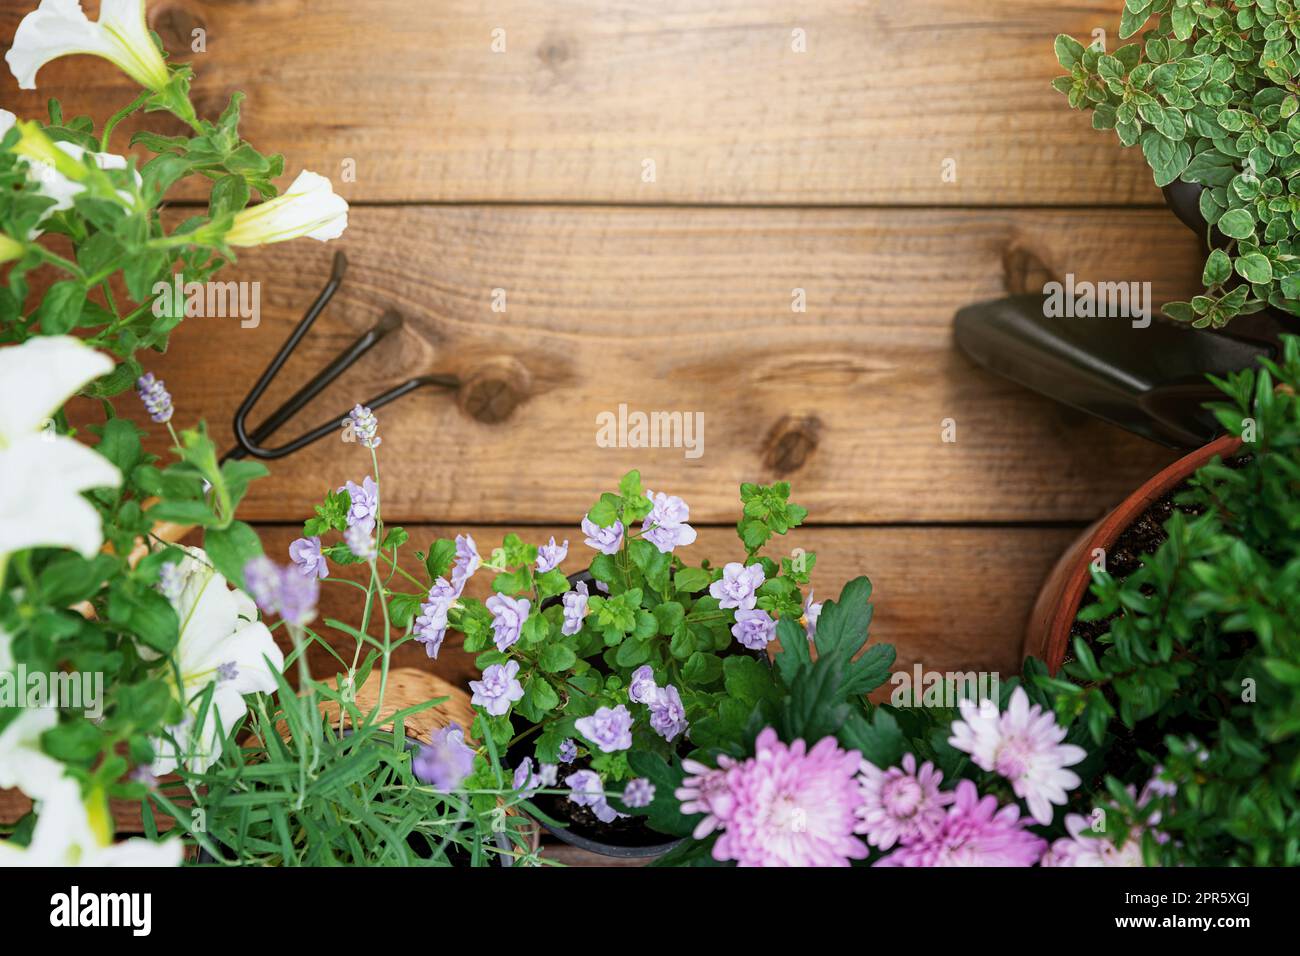 Gardening, landscaping tools, flowers and herbs in pots on brown wood background Stock Photo